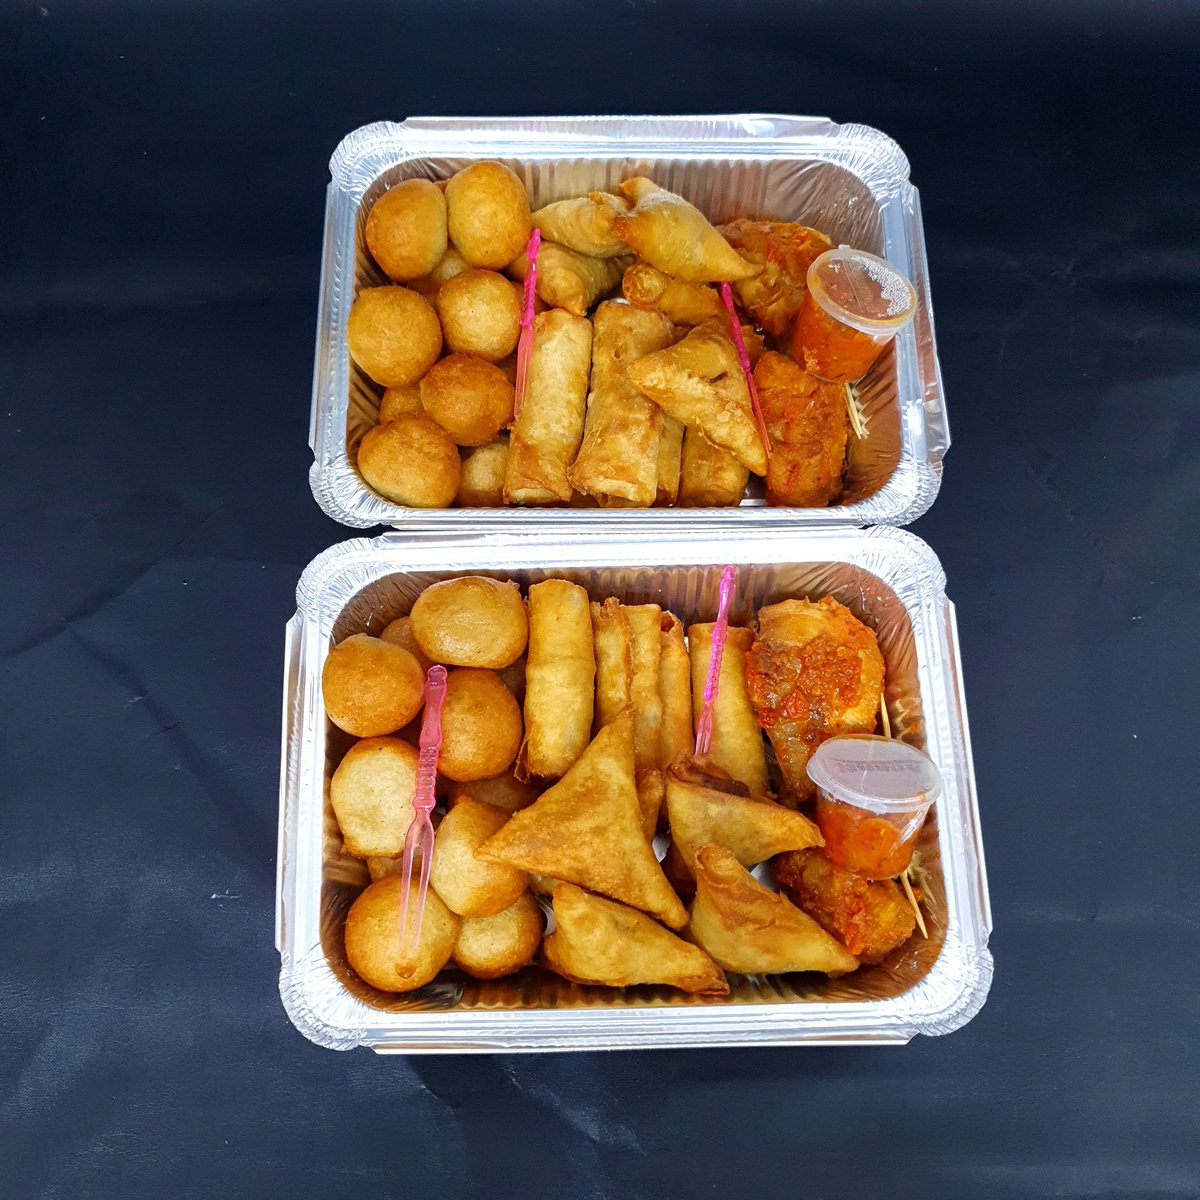 It's another weekend; eat small chops. Price: 5000 each. Send a DM or use the WhatsApp link in bio to place an order.😊